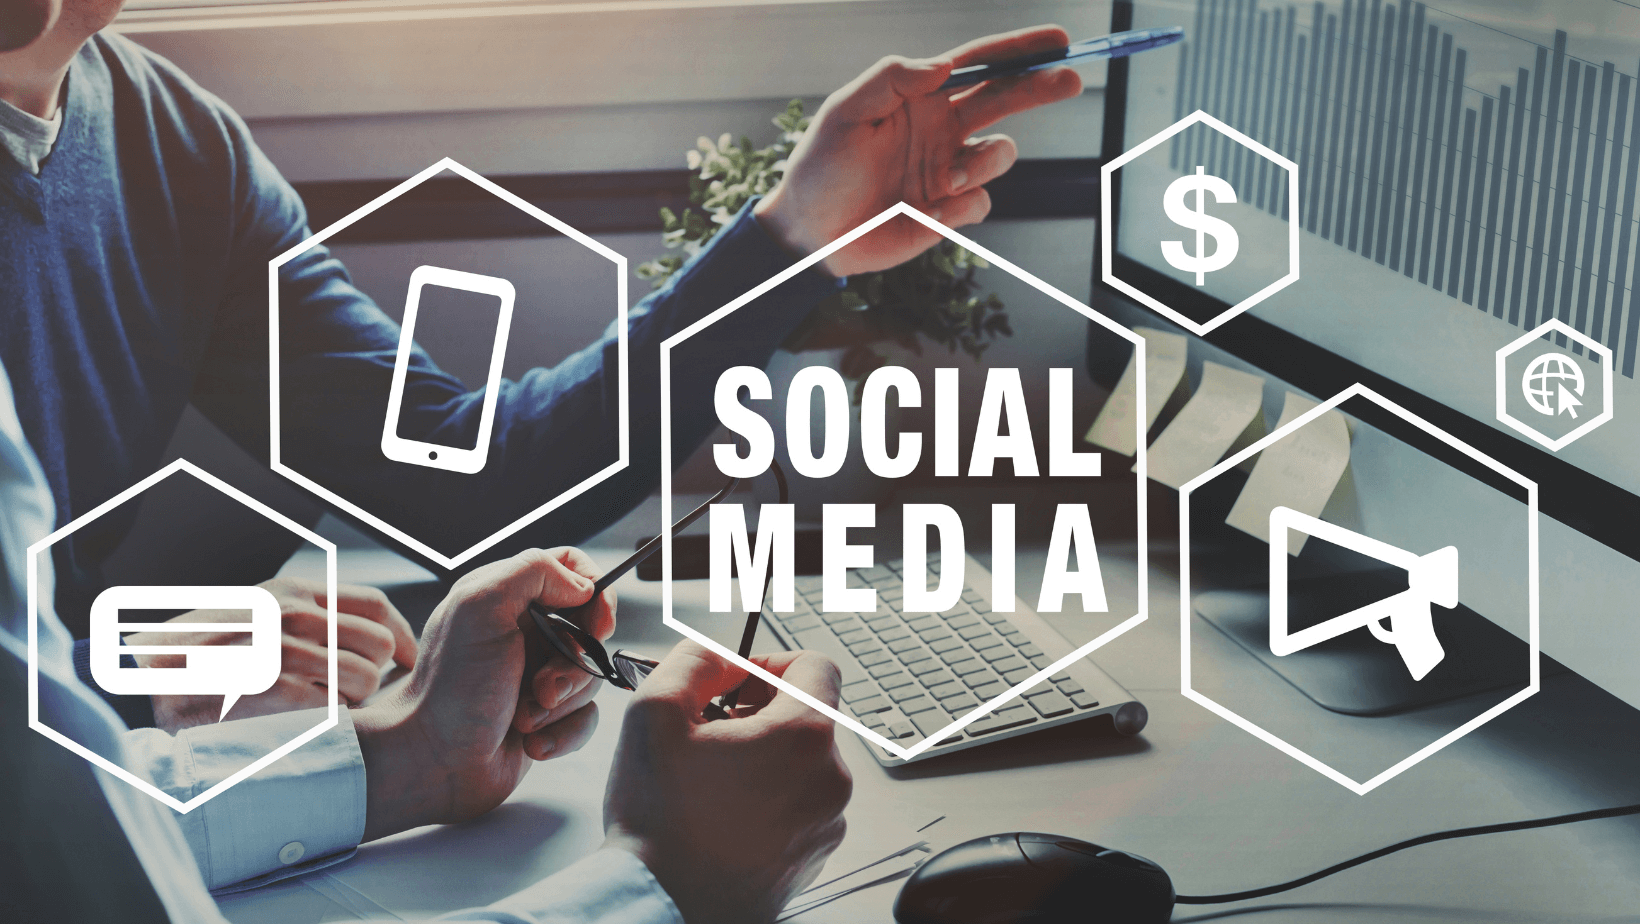 Social Media - Take Your Social Media to the Next Level by Hiring a Virtual Assistant in Australia